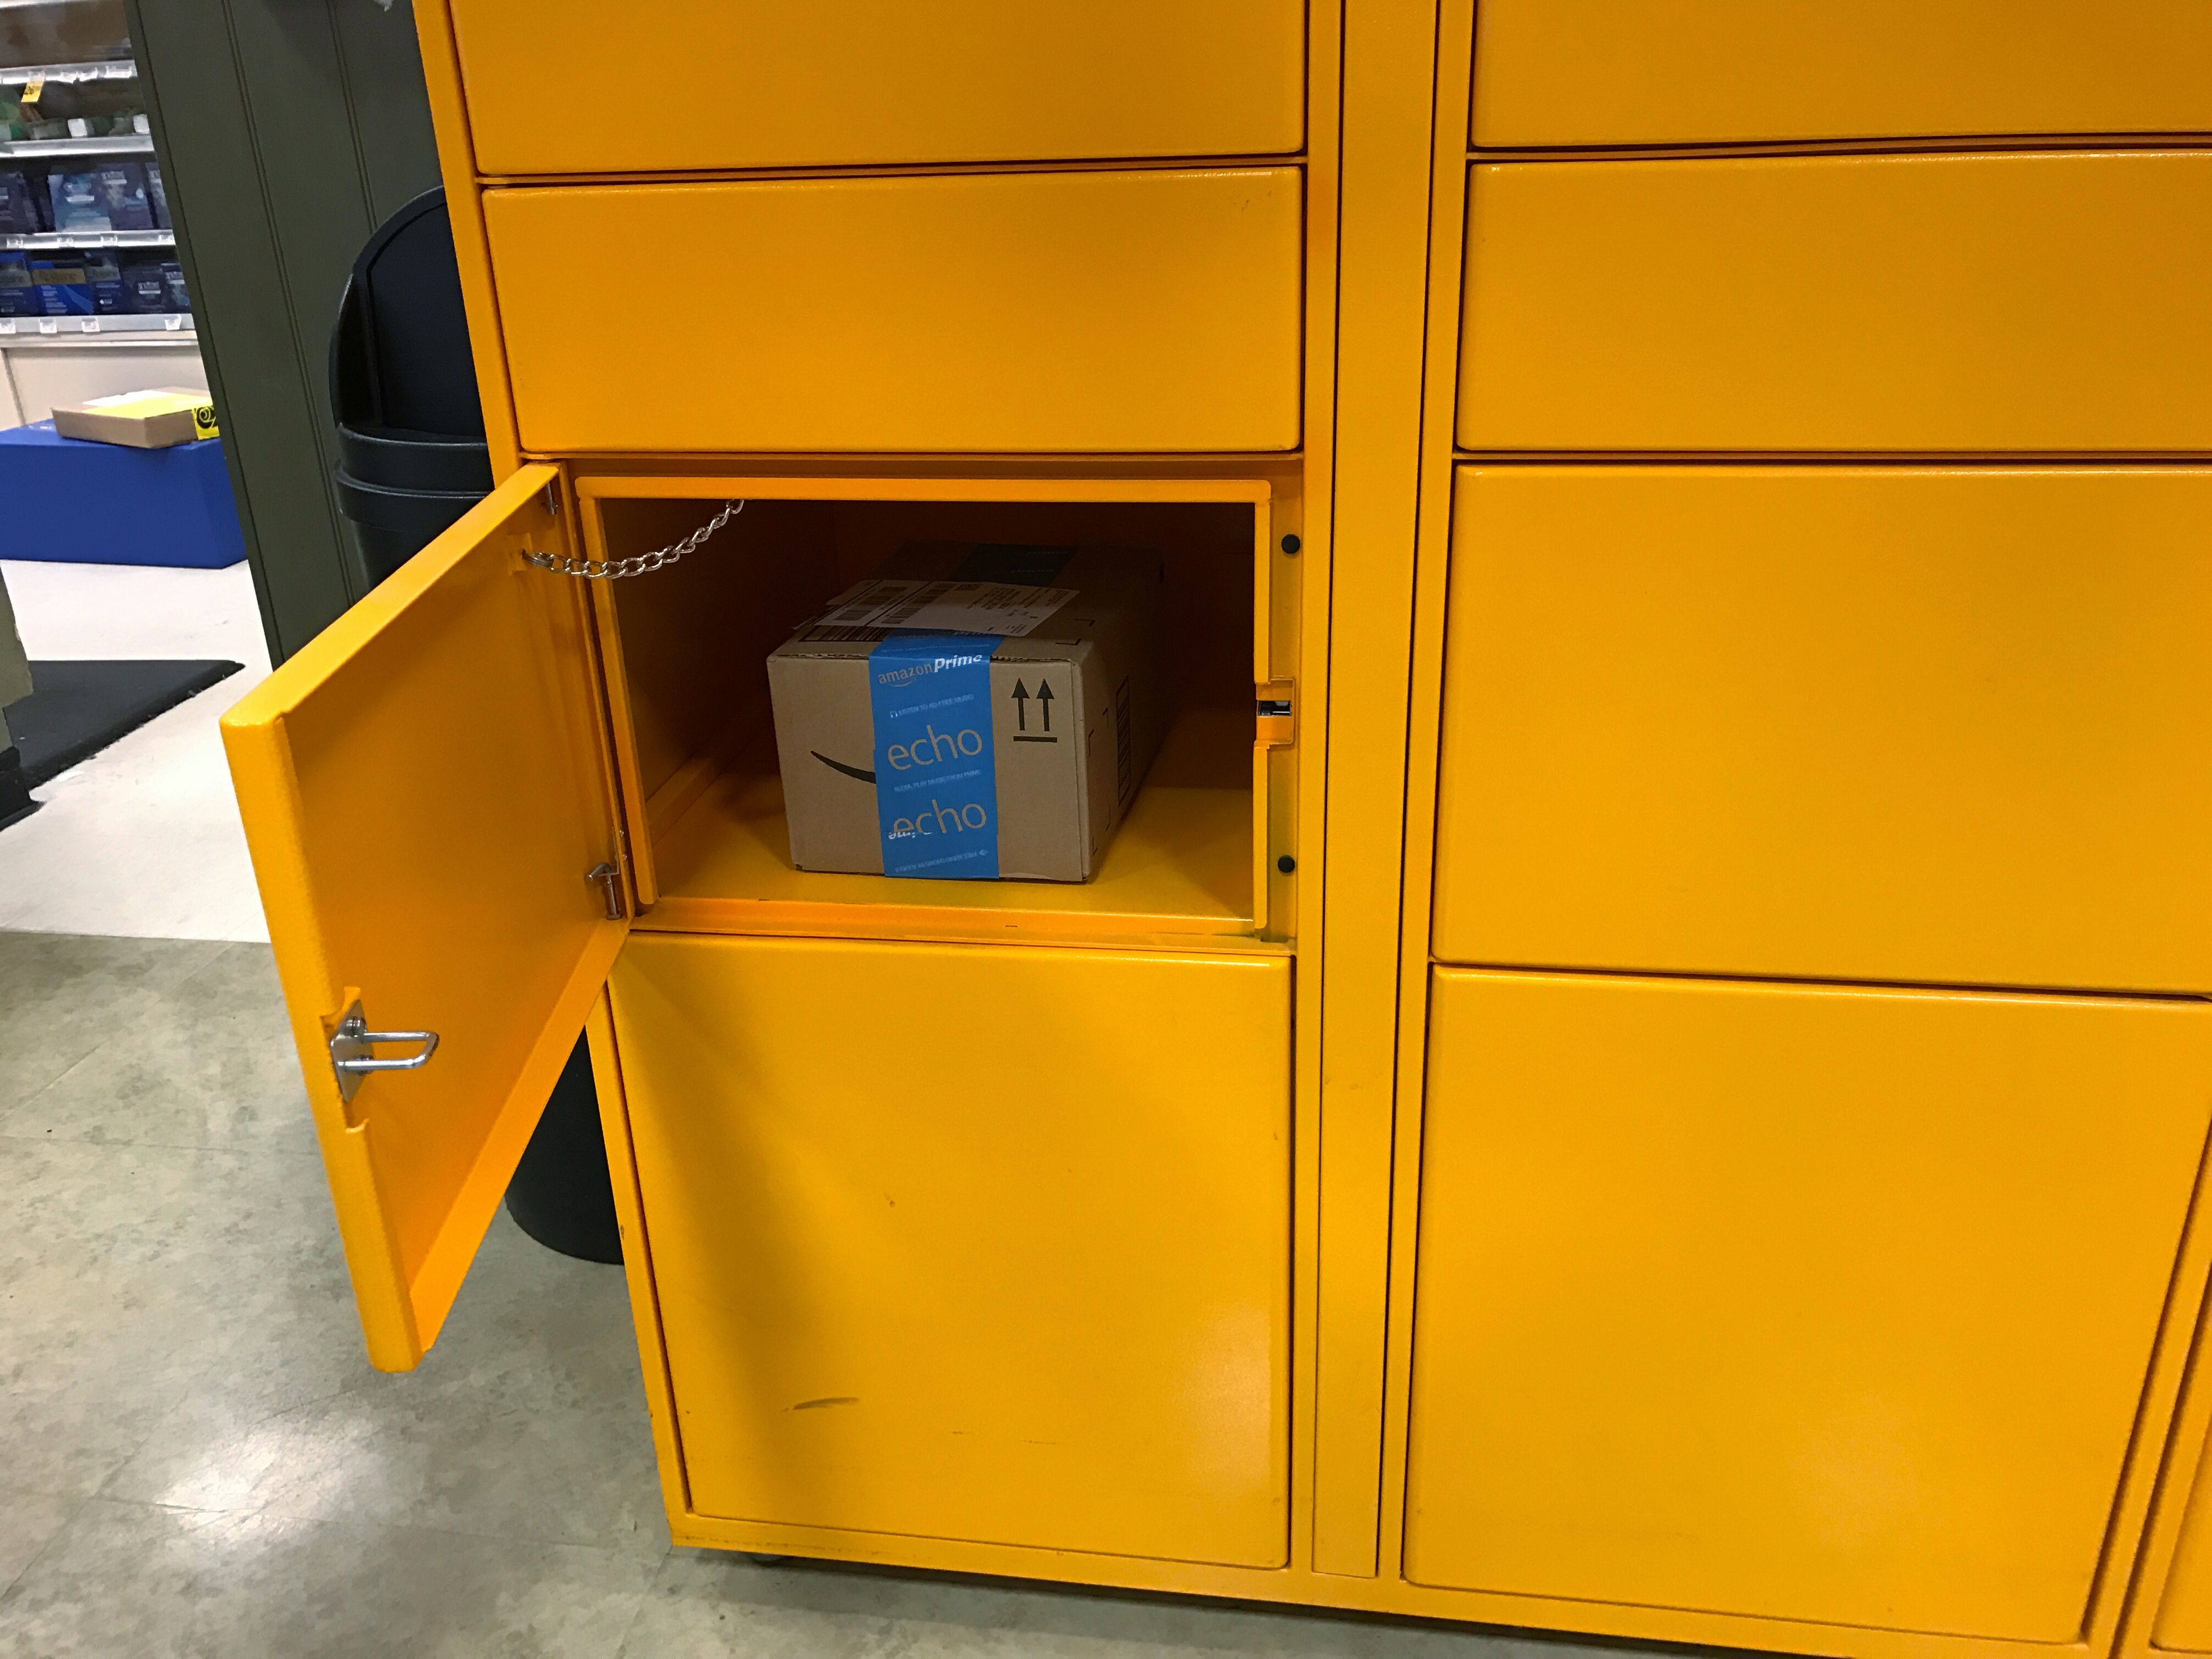 Detail view of opened Amazon locker with package inside the compartment